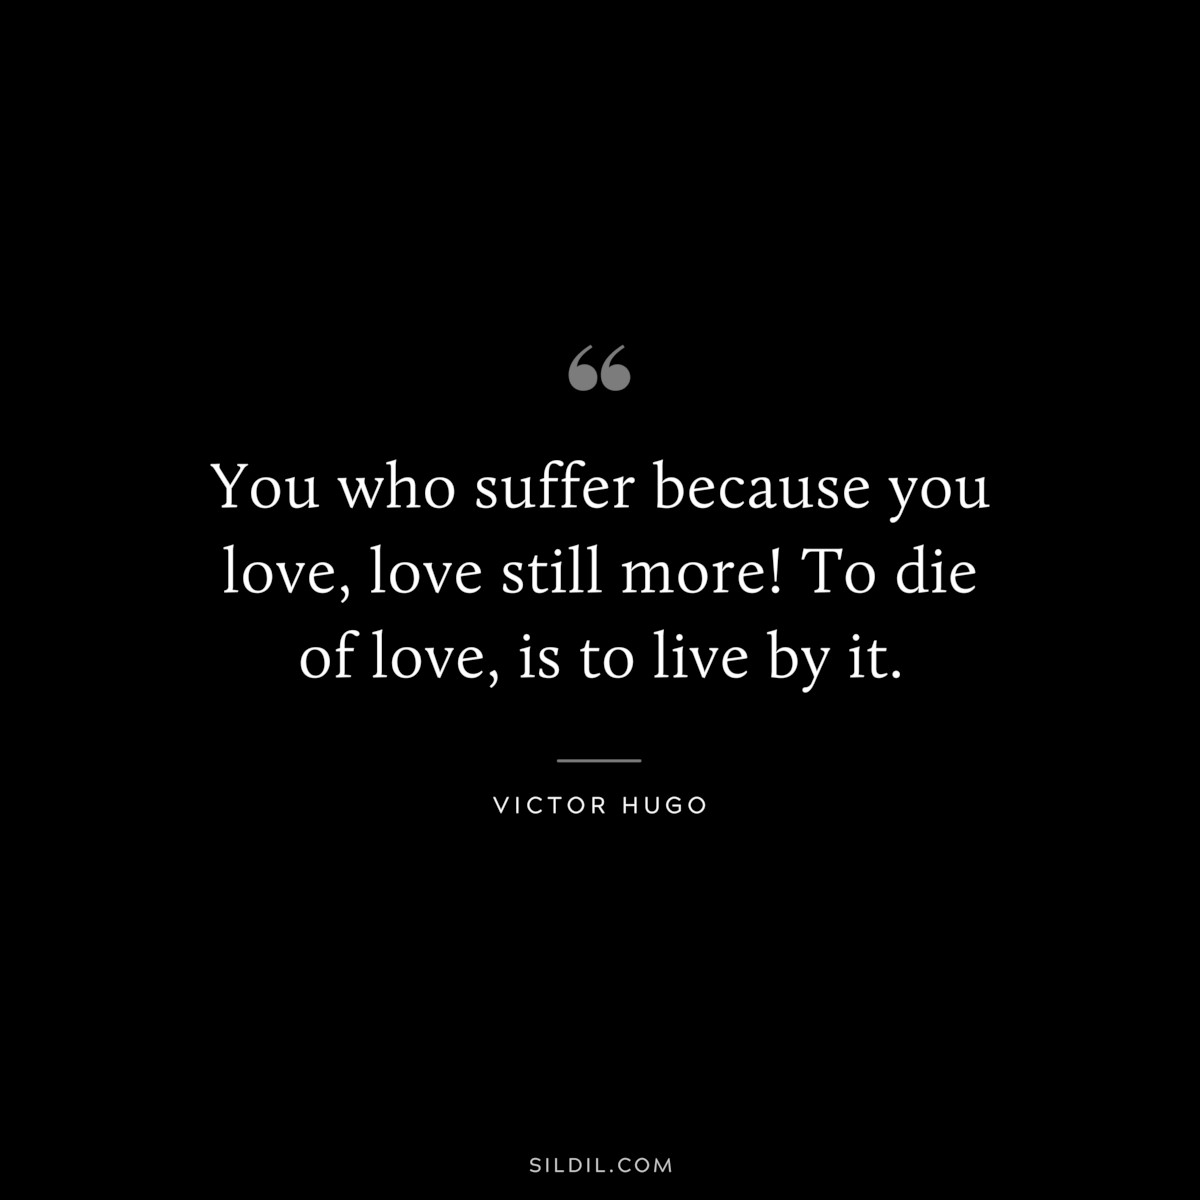 You who suffer because you love, love still more! To die of love, is to live by it.― Victor Hugo